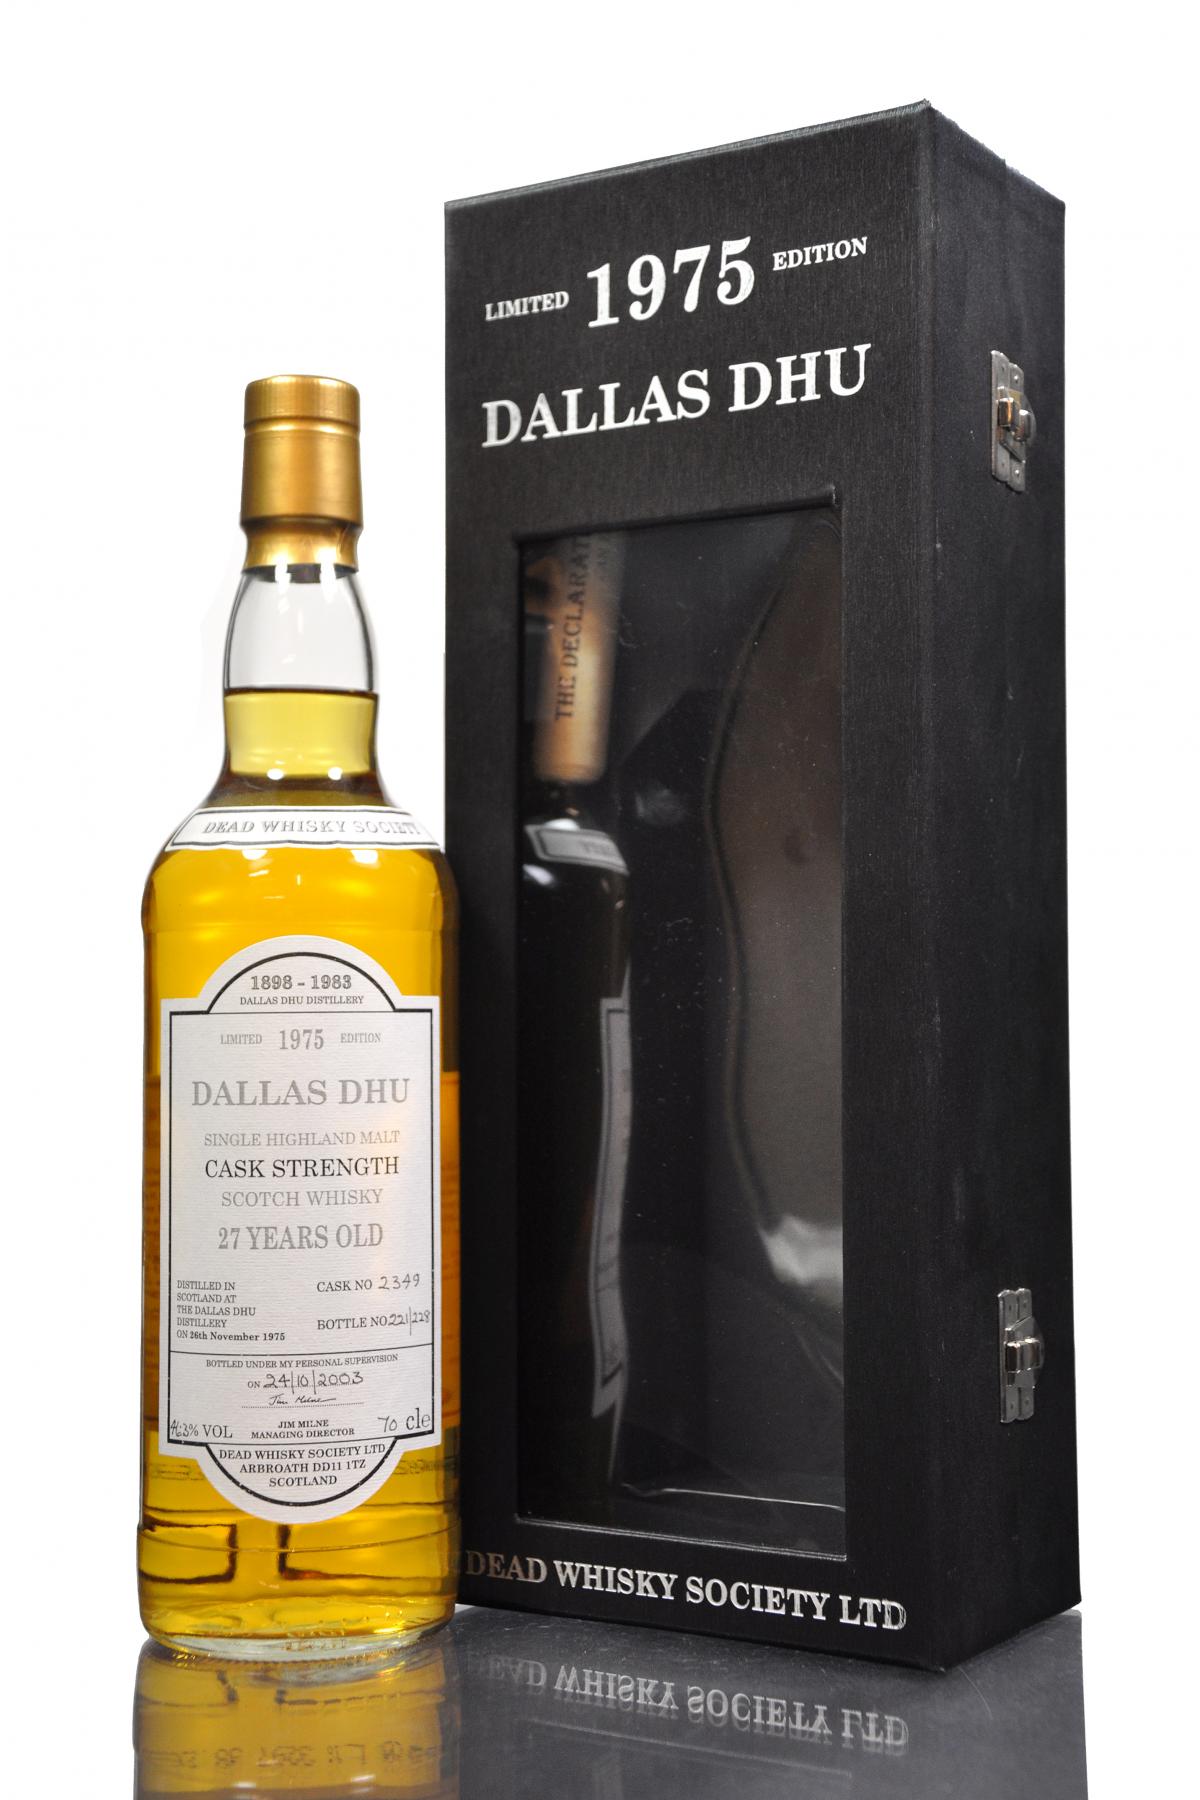 Dallas Dhu 1975 - 27 Year Old - Dead Whisky Society